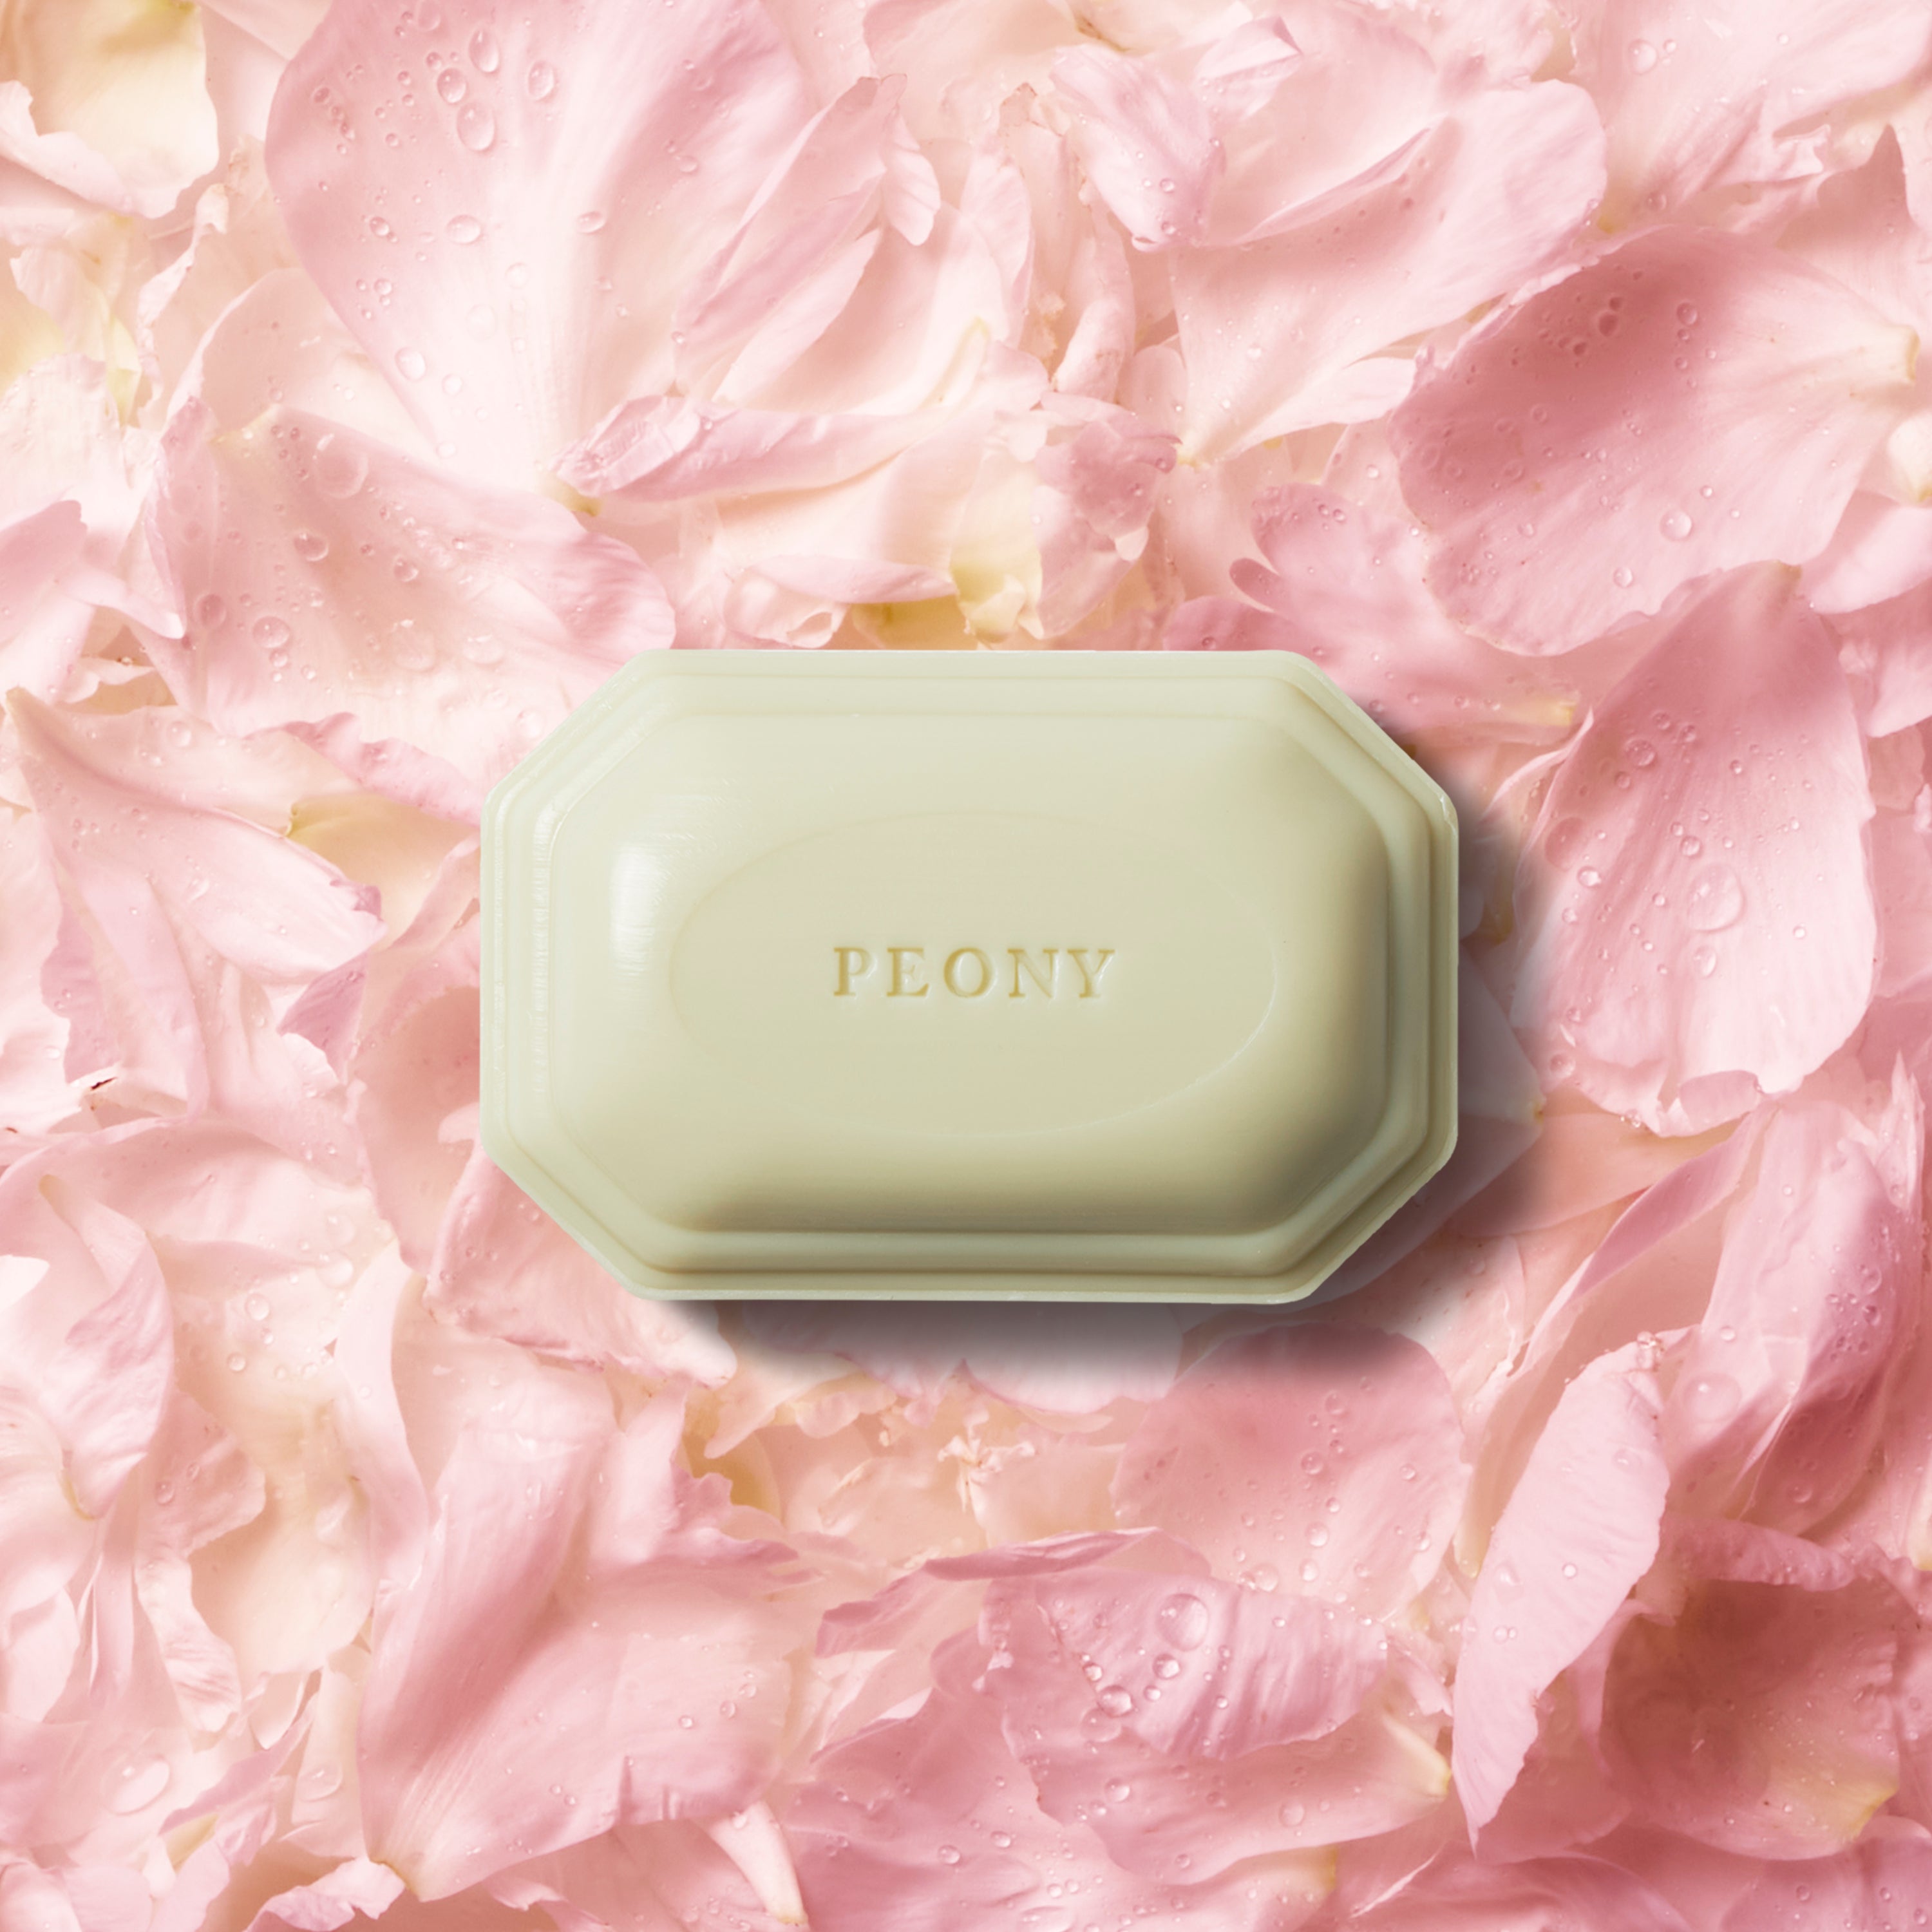 Caswell-Massey Peony Bar Soap shown on bed of soft pink peony petals